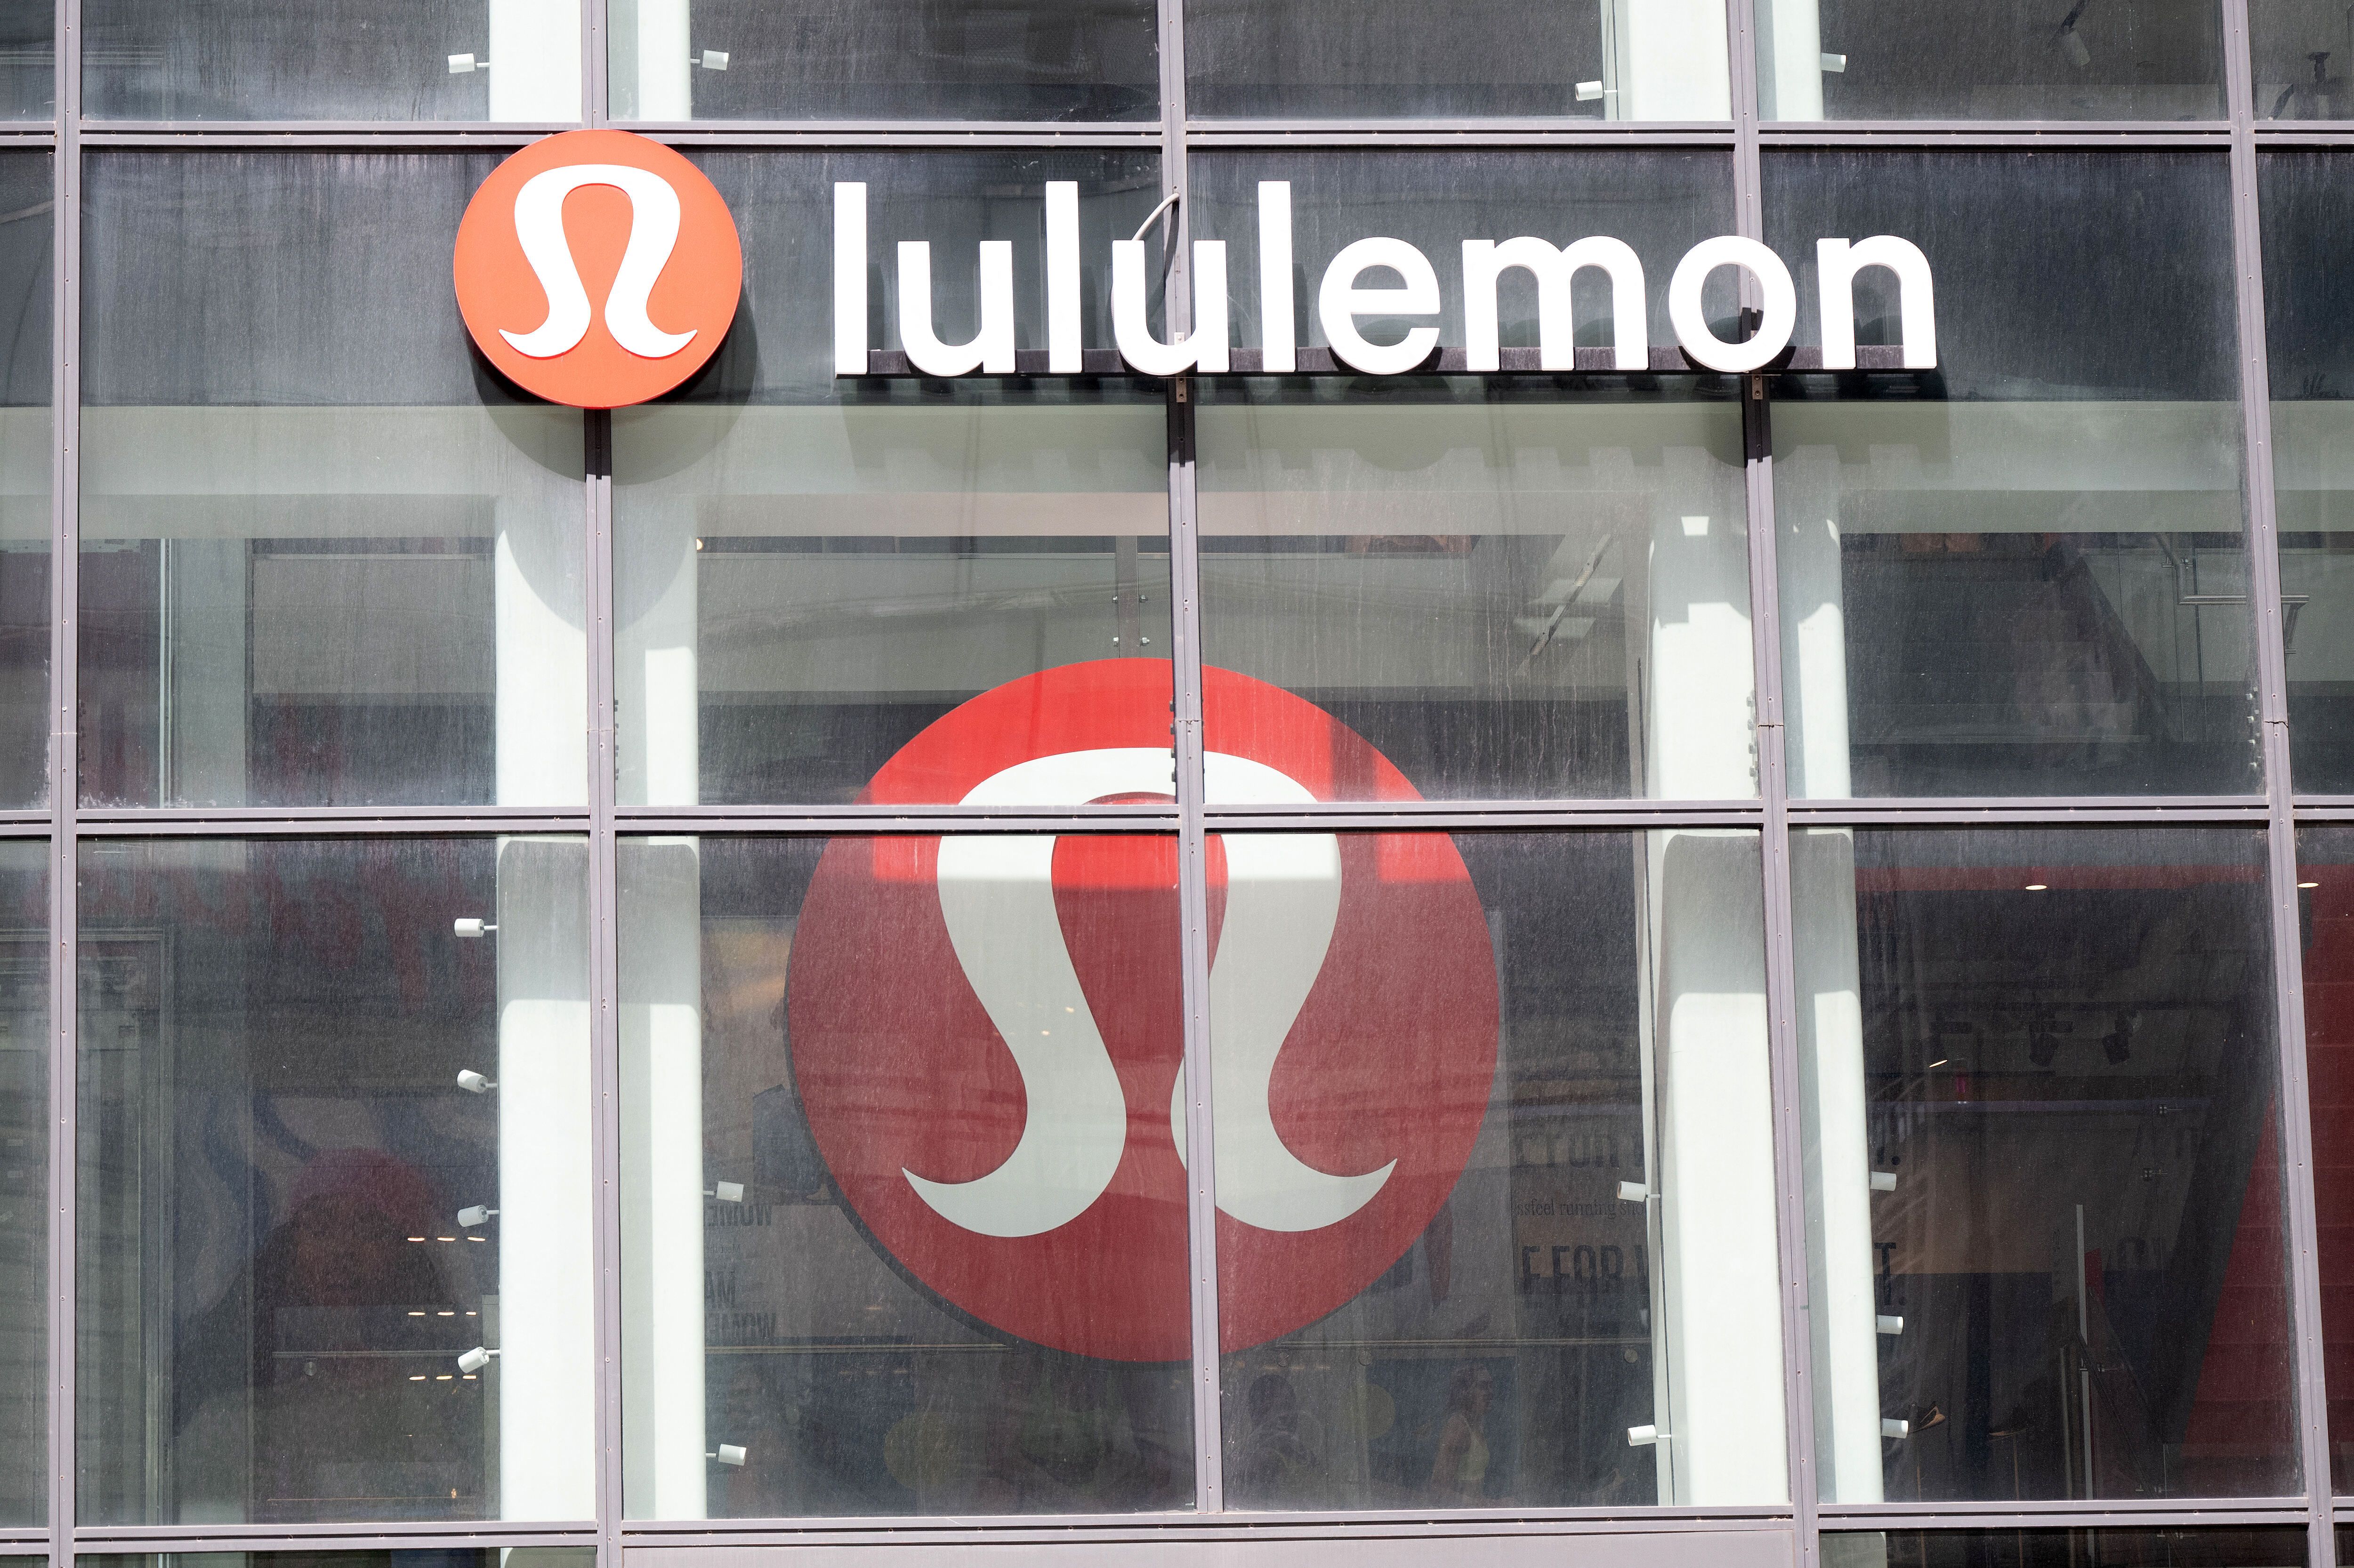 Lululemon stock surges after reporting sales growth